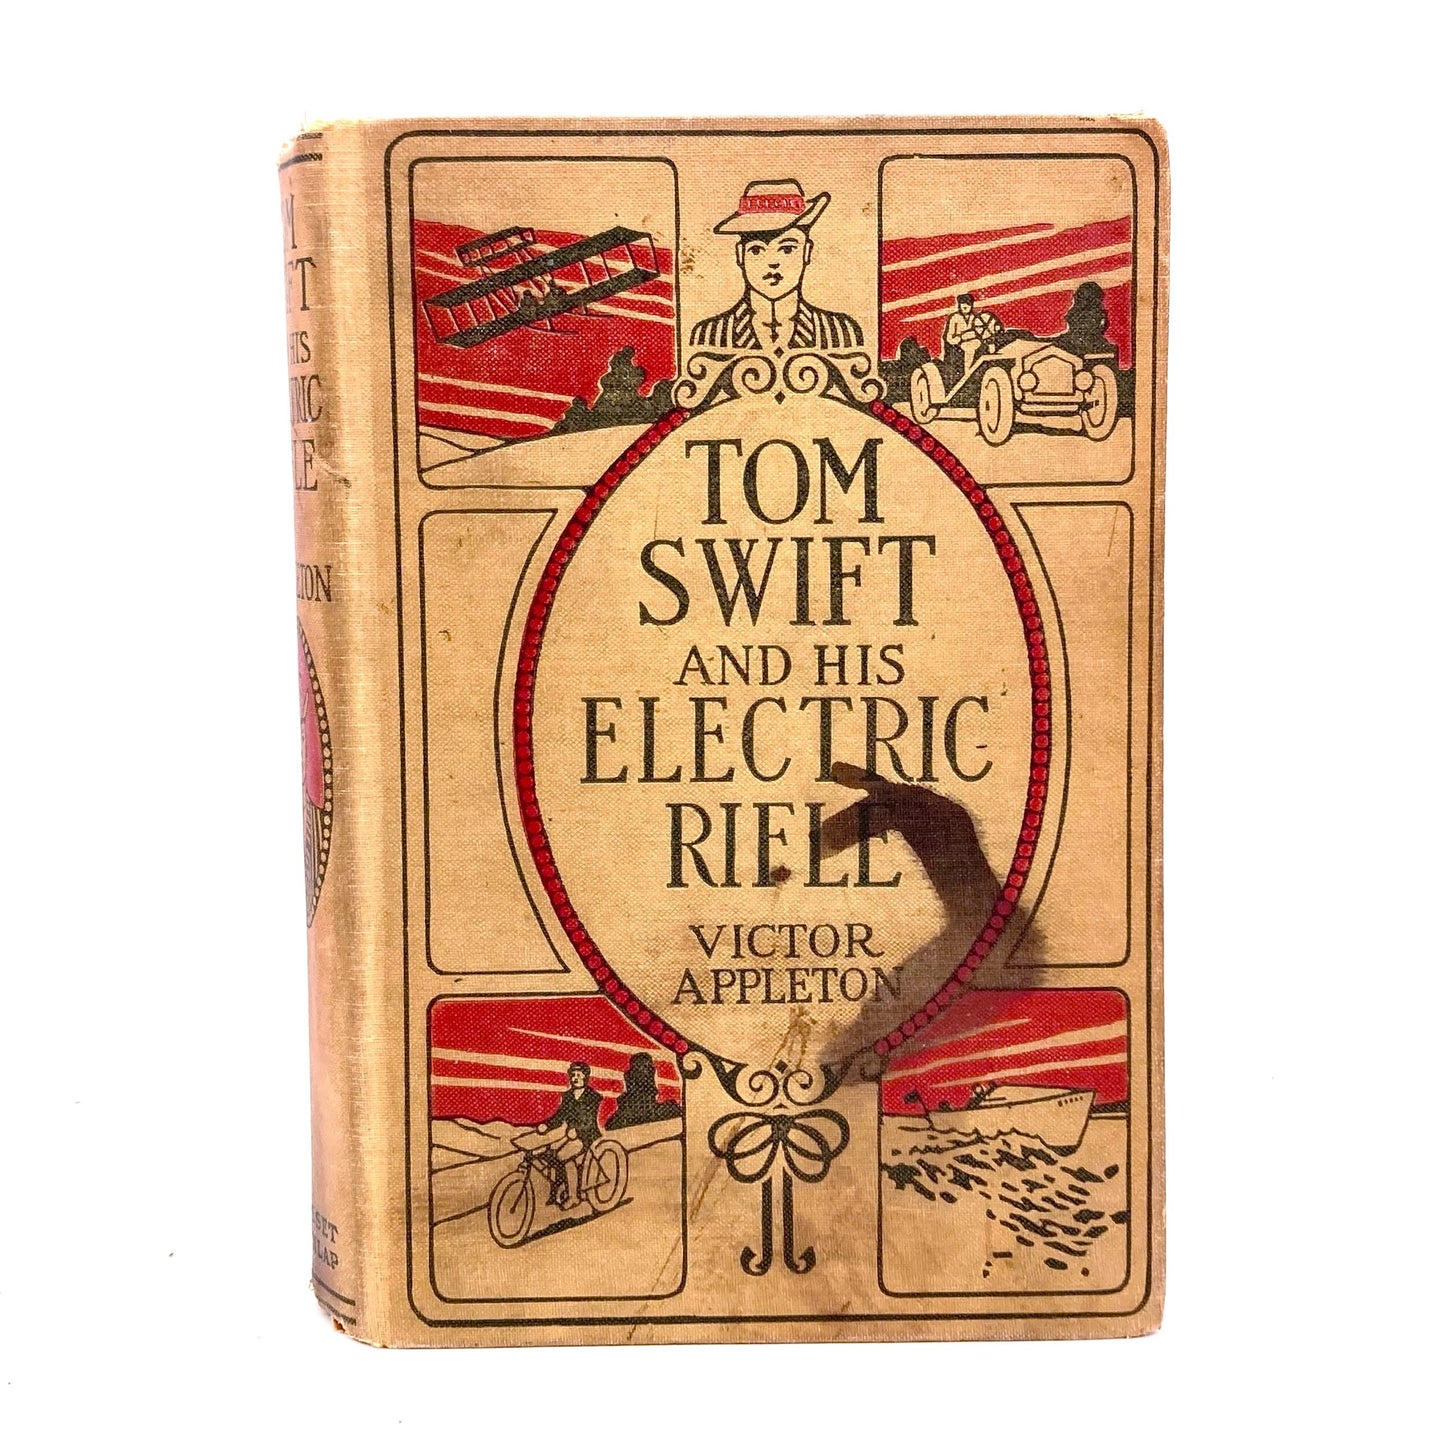 APPLETON, Victor “Tom Swift and His Electric Rifle” [Grosset & Dunlap, 1911] - Buzz Bookstore